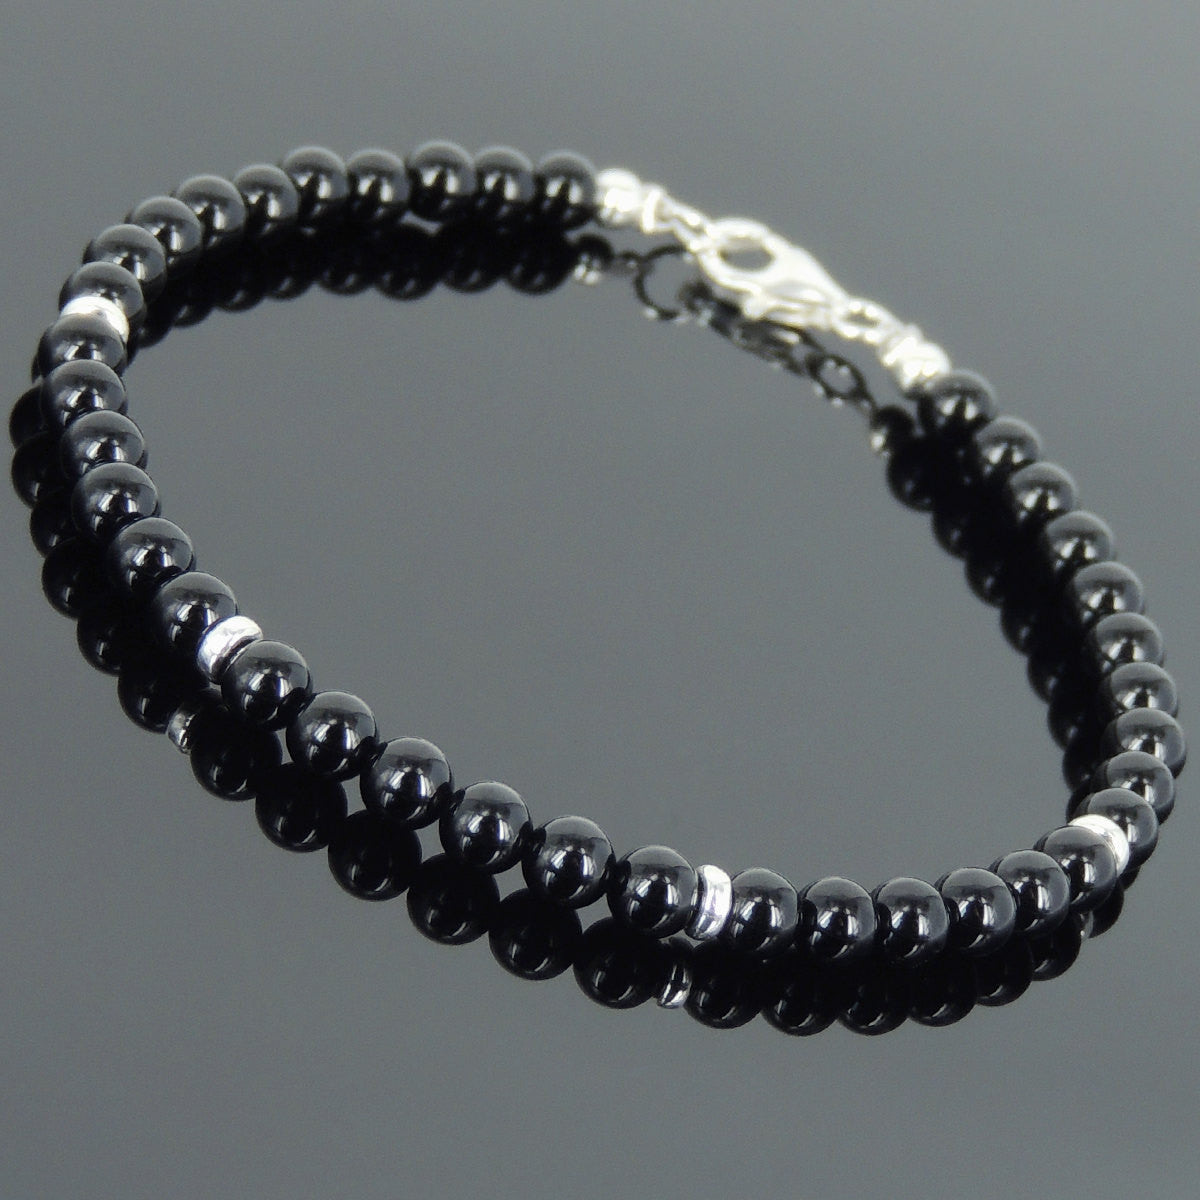 4mm Bright Black Onyx Healing Gemstone Bracelet with S925 Sterling Silver Seamless Spacers & Clasp - Handmade by Gem & Silver BR640